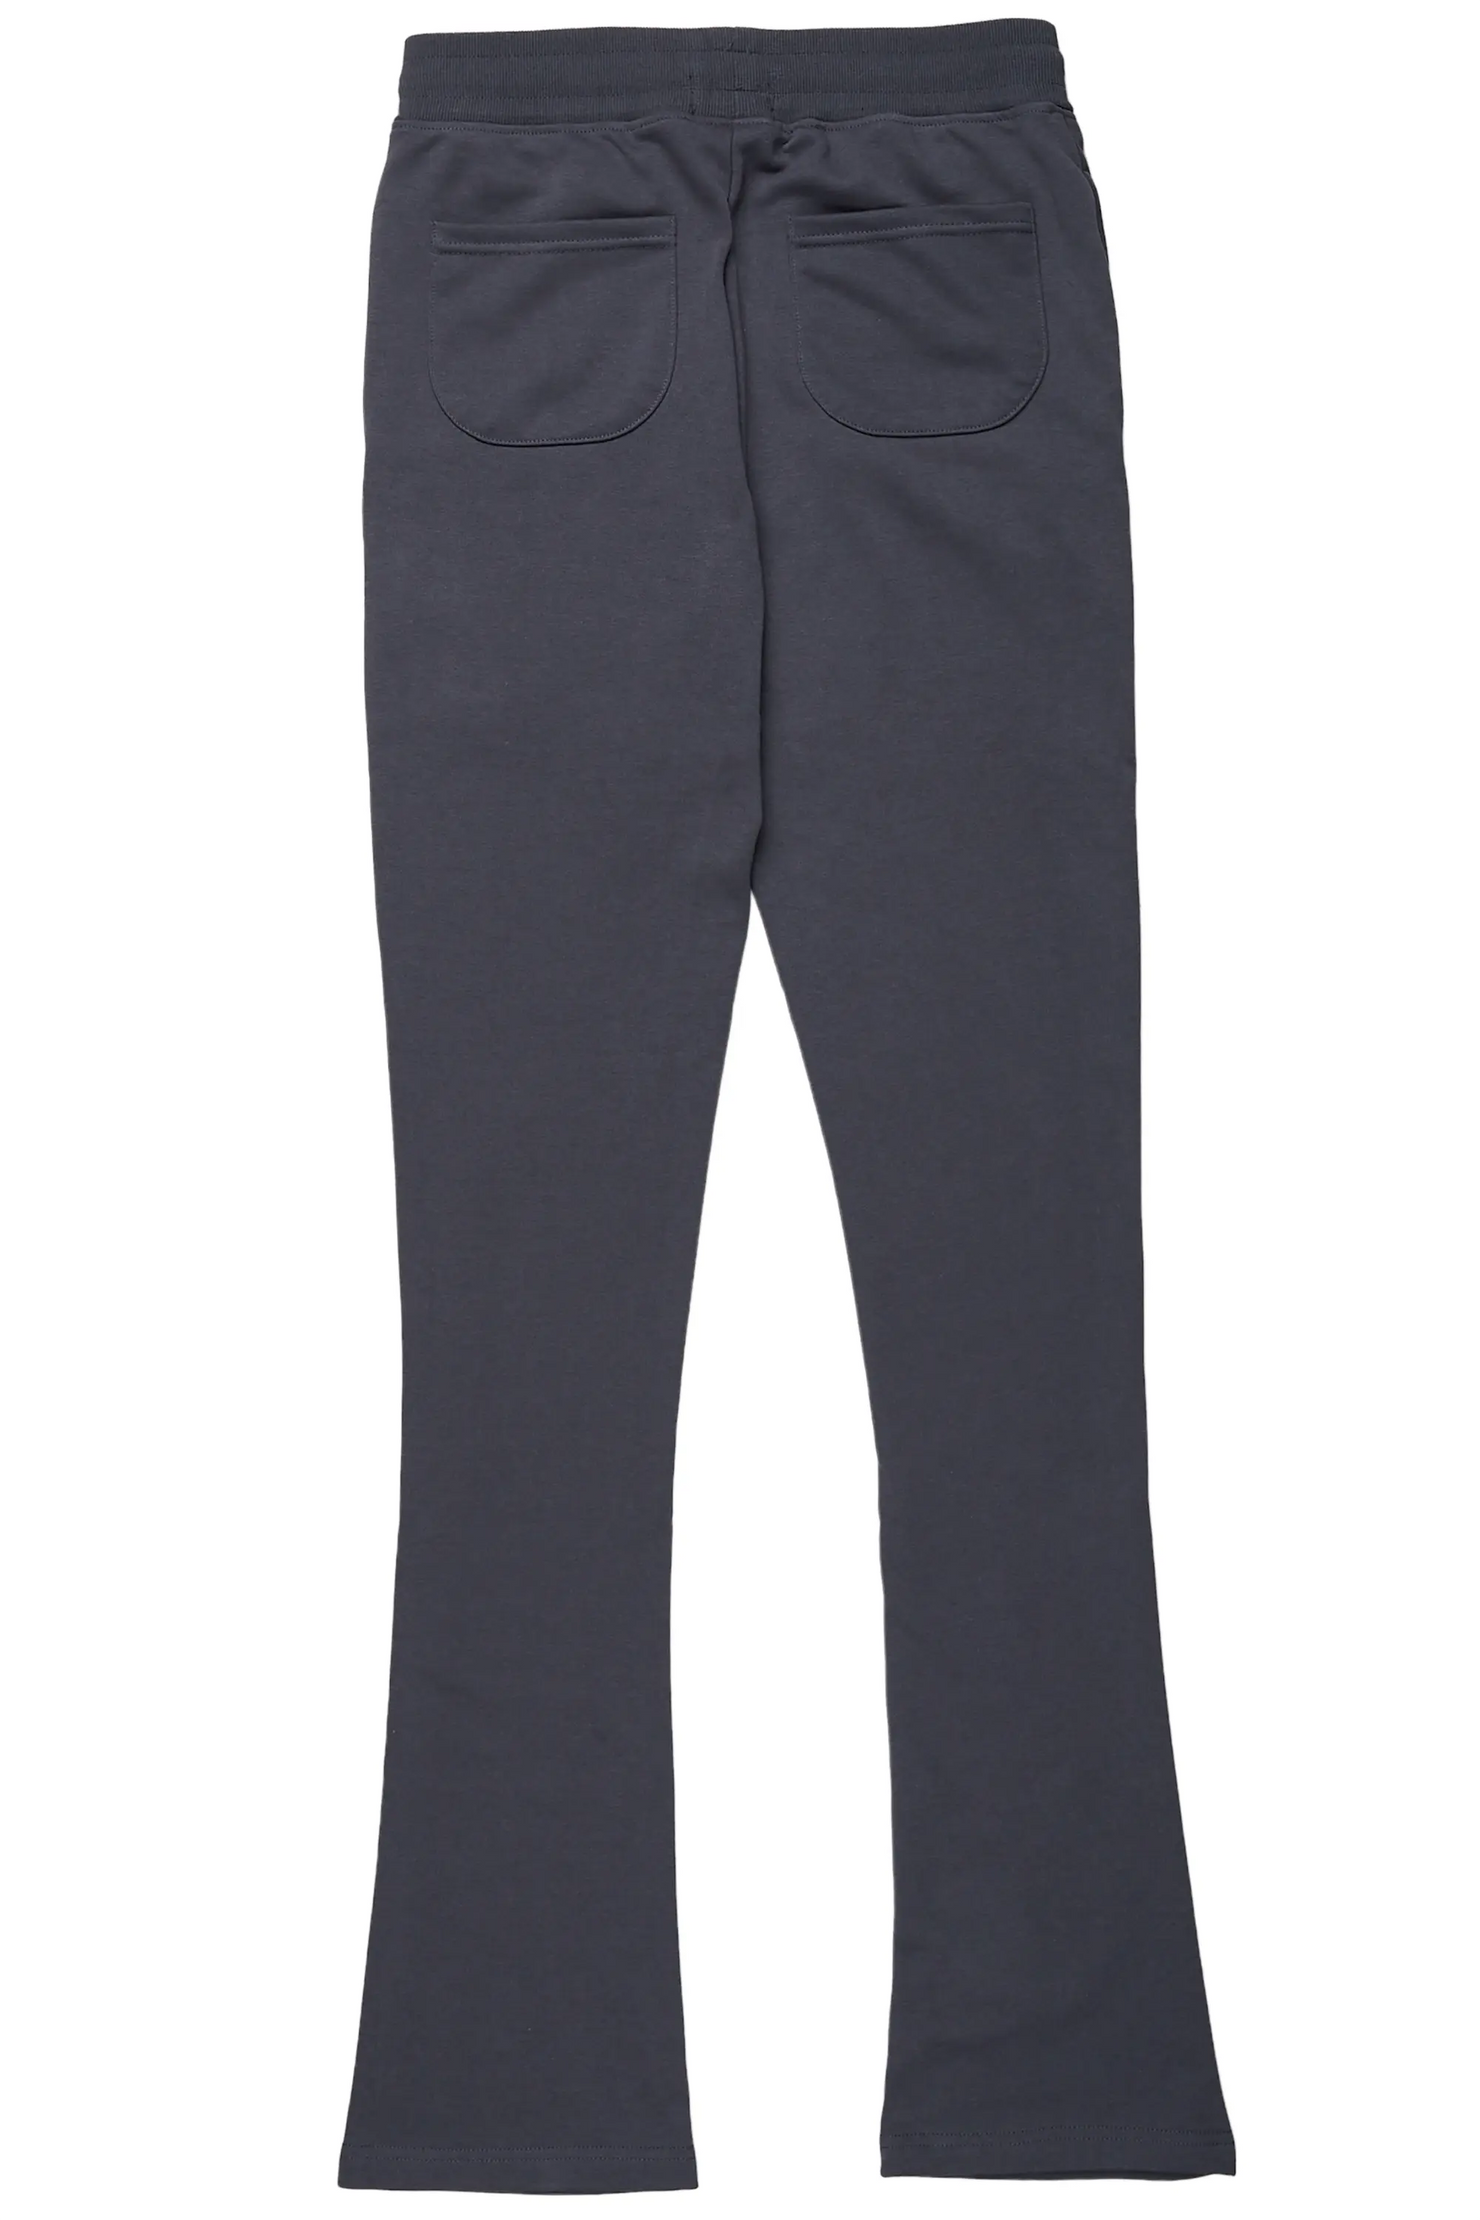 Alpine Charcoal Stacked Flare Pant